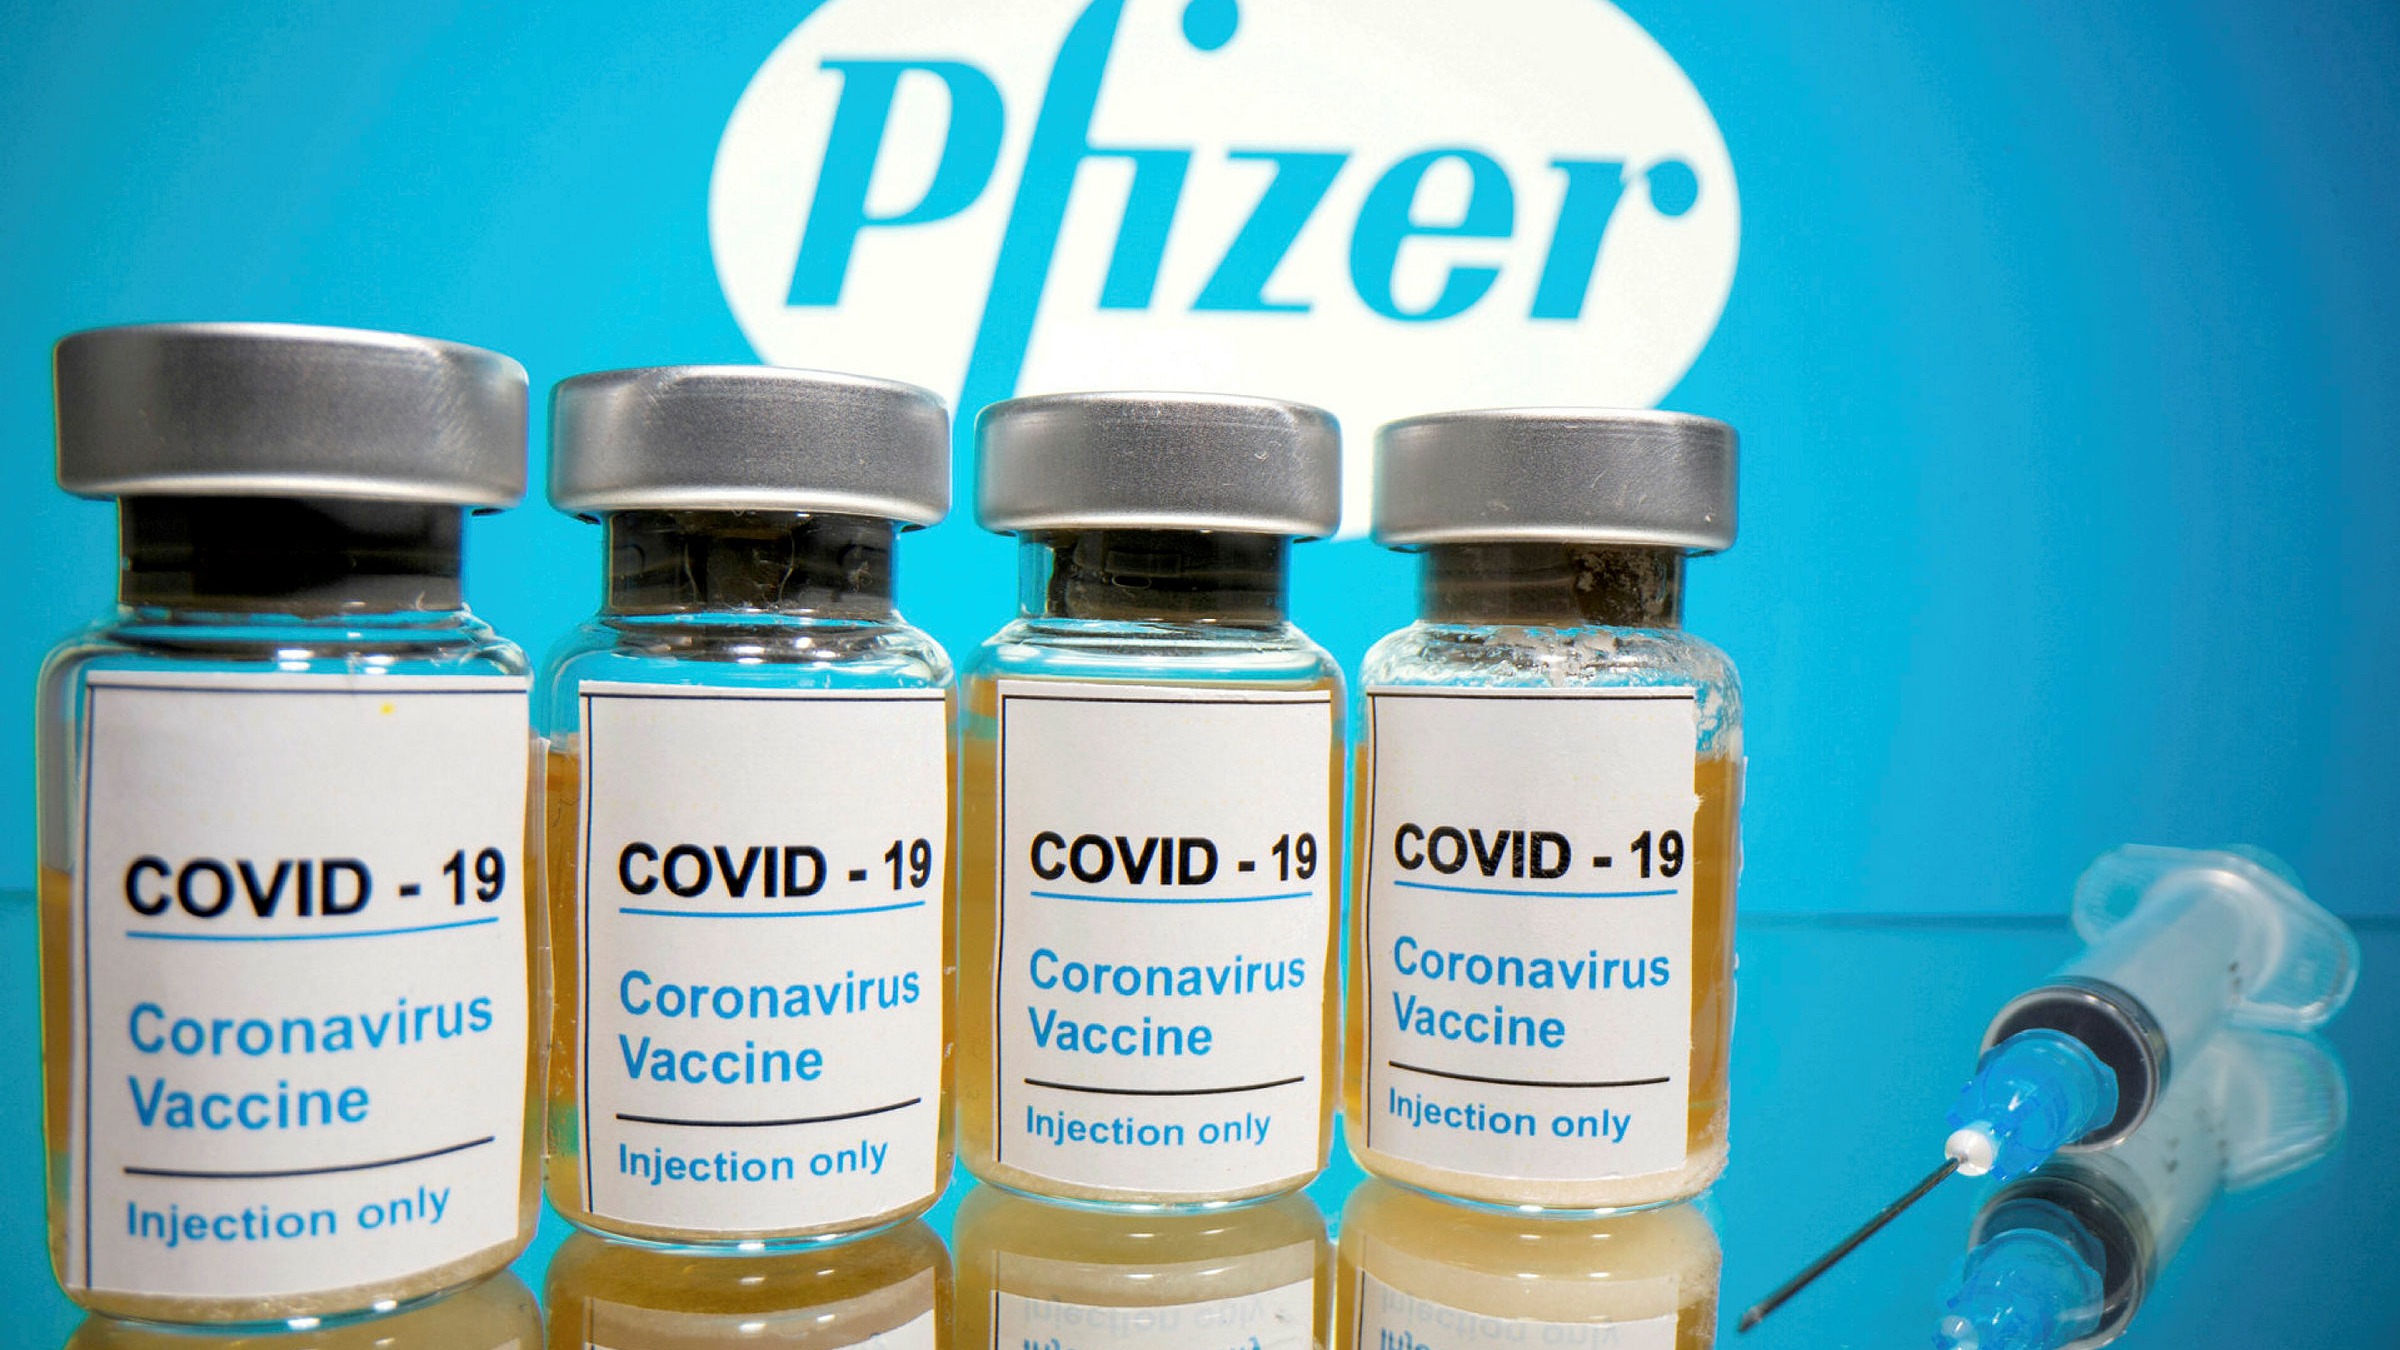 Pfizer expects $15bn in Covid vaccine revenue this year | Financial Times